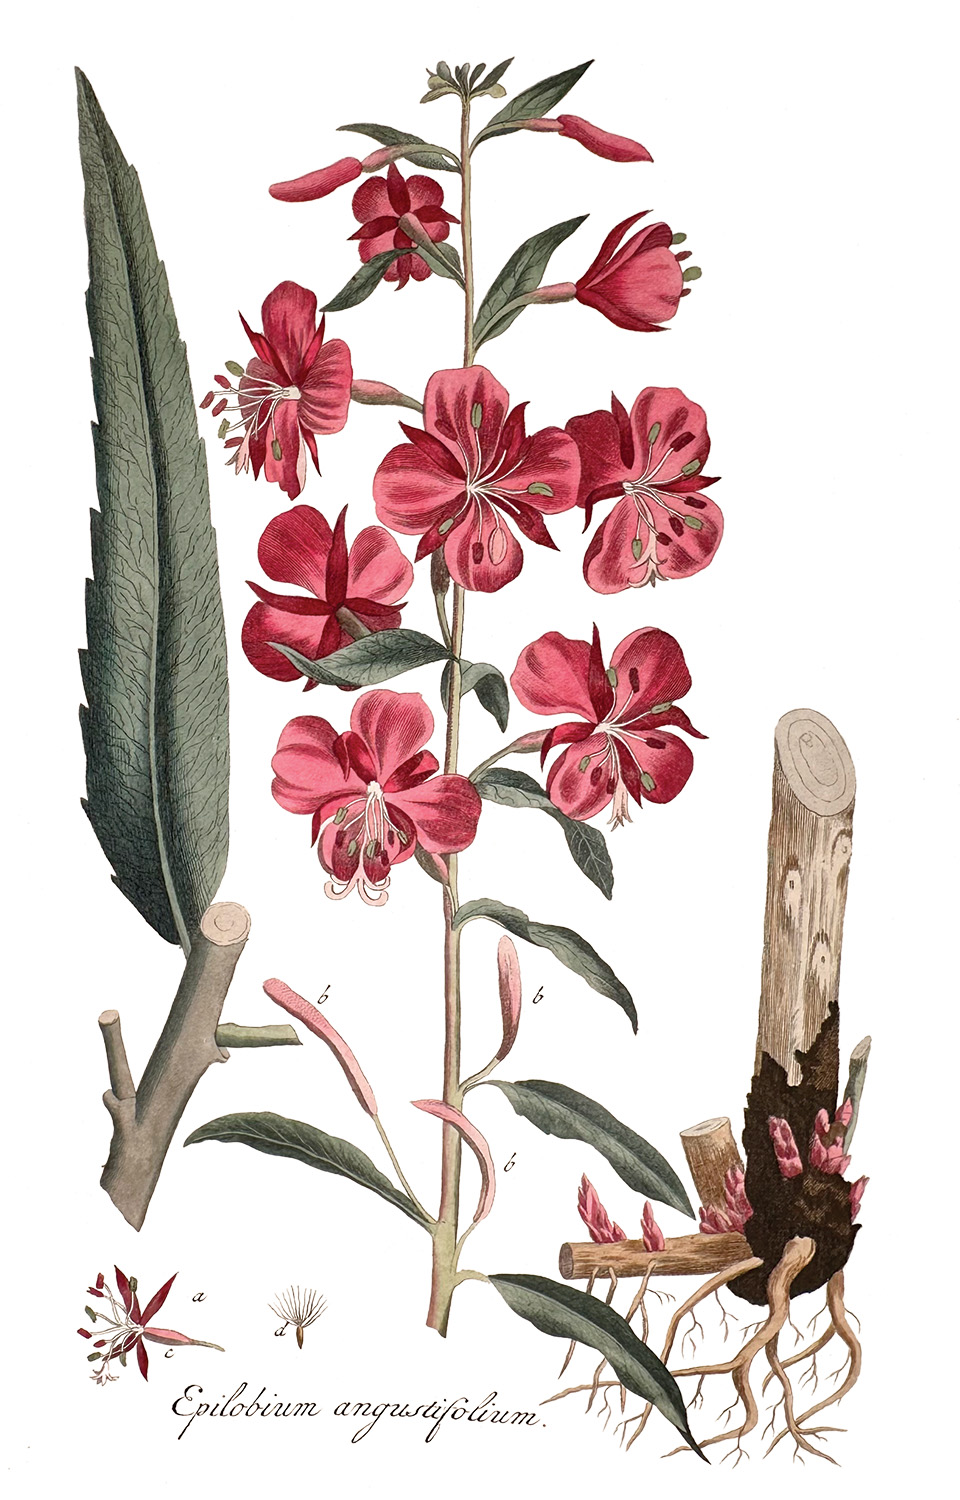 Colored botanical illustrations of a pink flower, including its leaves and roots. The flower is comprised of many smaller flowers of four large pink petals, with four smaller and thinner petals alternating, which bud off the main woody-looking stem of the plant. The leaves are a little larger than the smaller flower, but very thin. The illustration of the roots shows how the plant can also spread by root, and displays a cross section of the stem, which is comprised of rings similar to tree growth. 